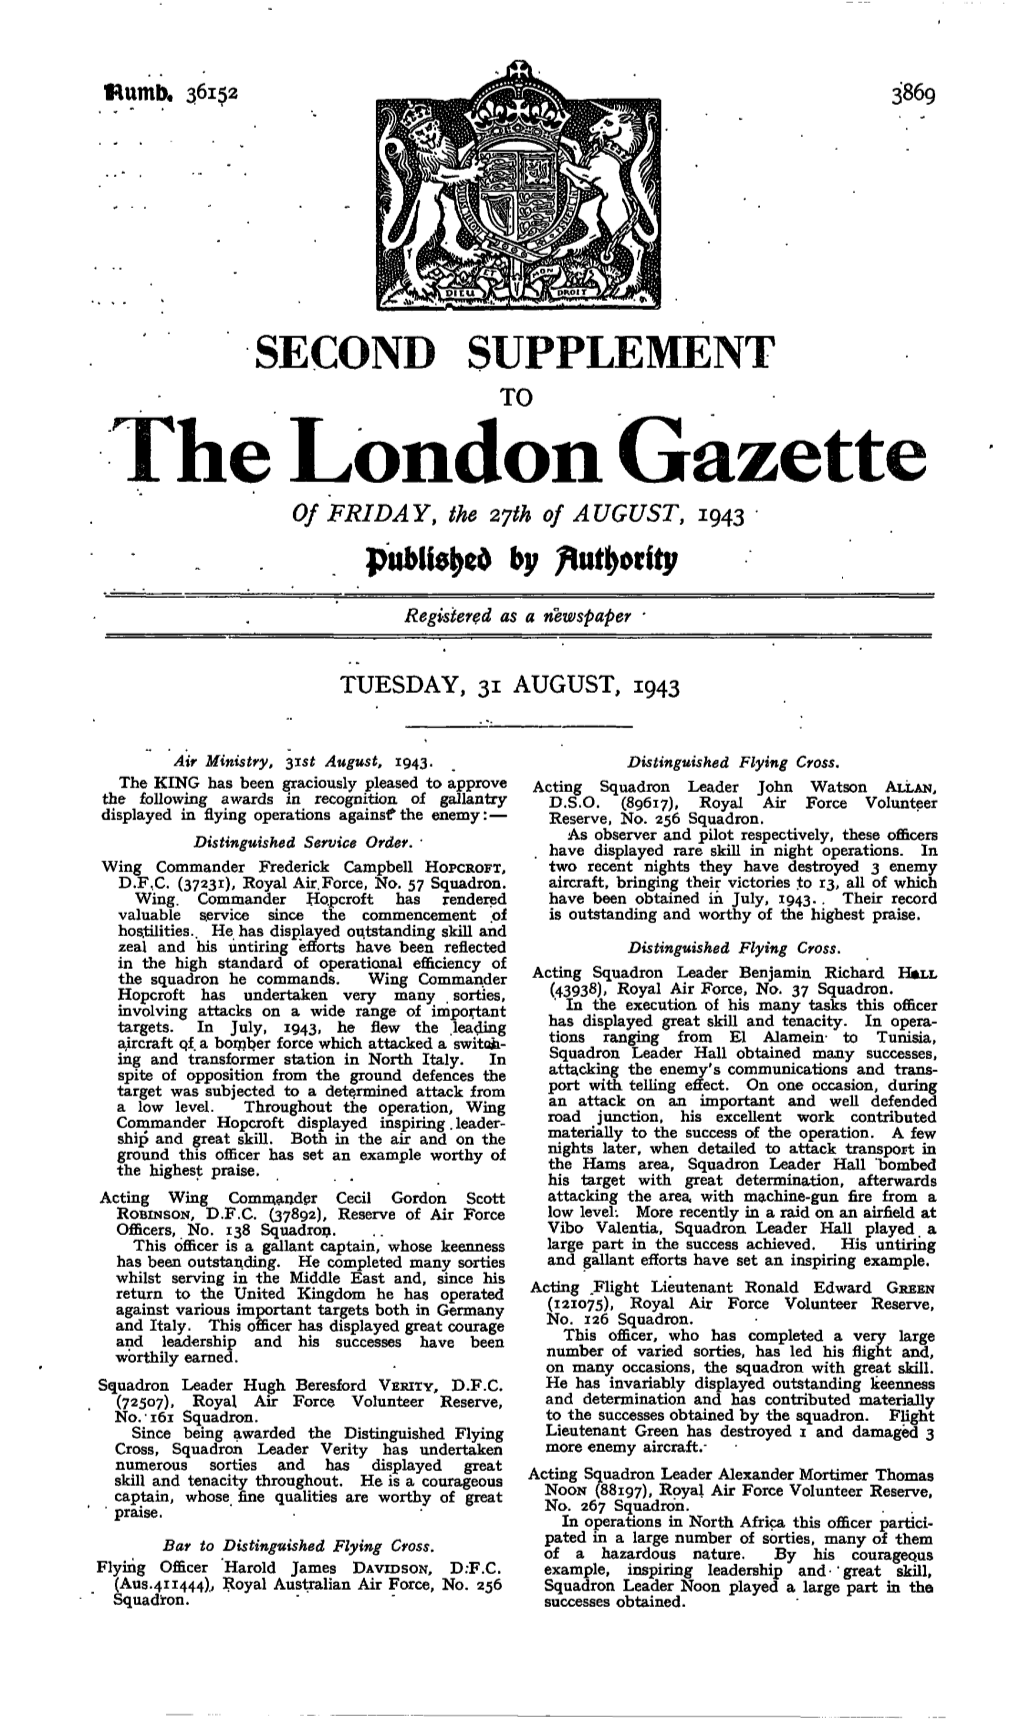 The London Gazette of FRIDAY, the 2Jth of AUGUST, 1943